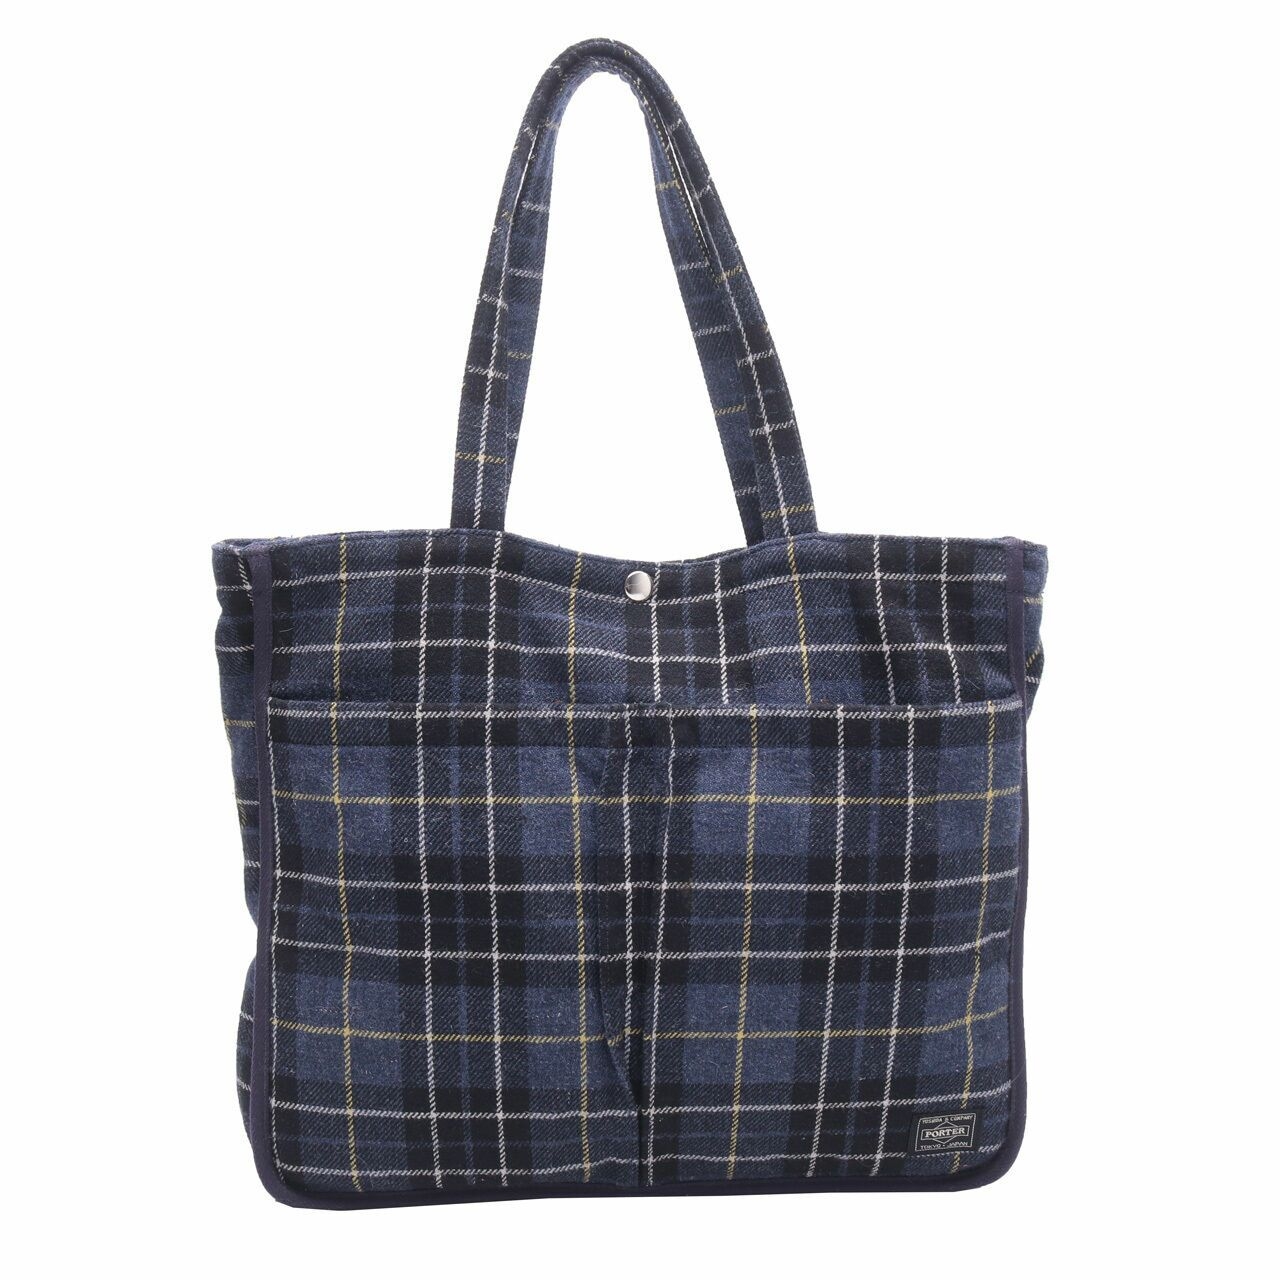 Private Collection Navy Tote Bag